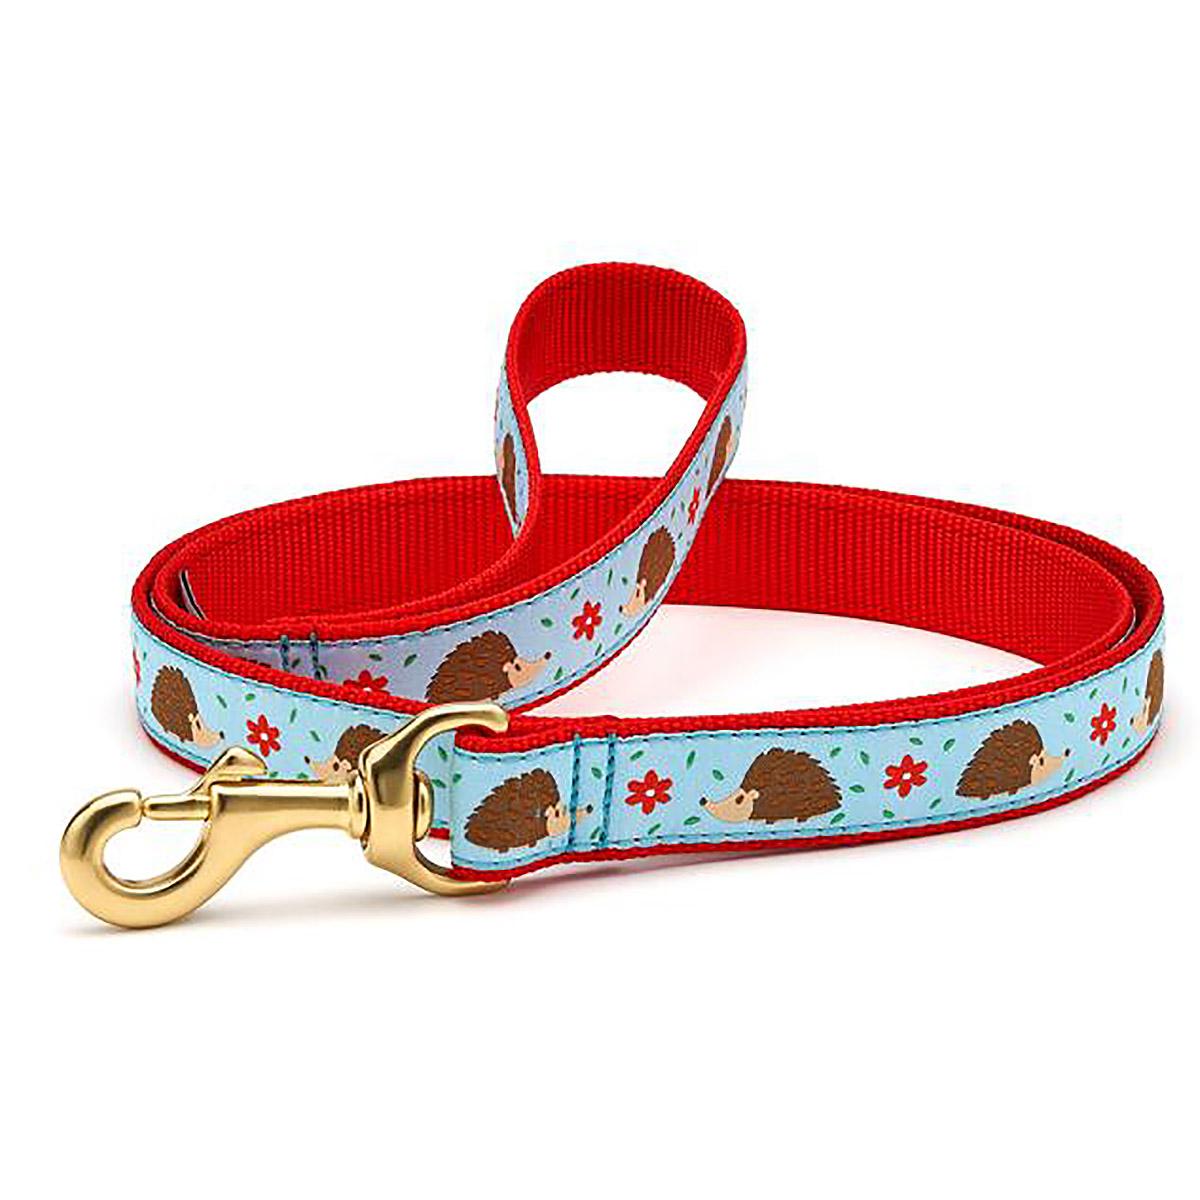 Hedgehog Dog Leash by Up Country